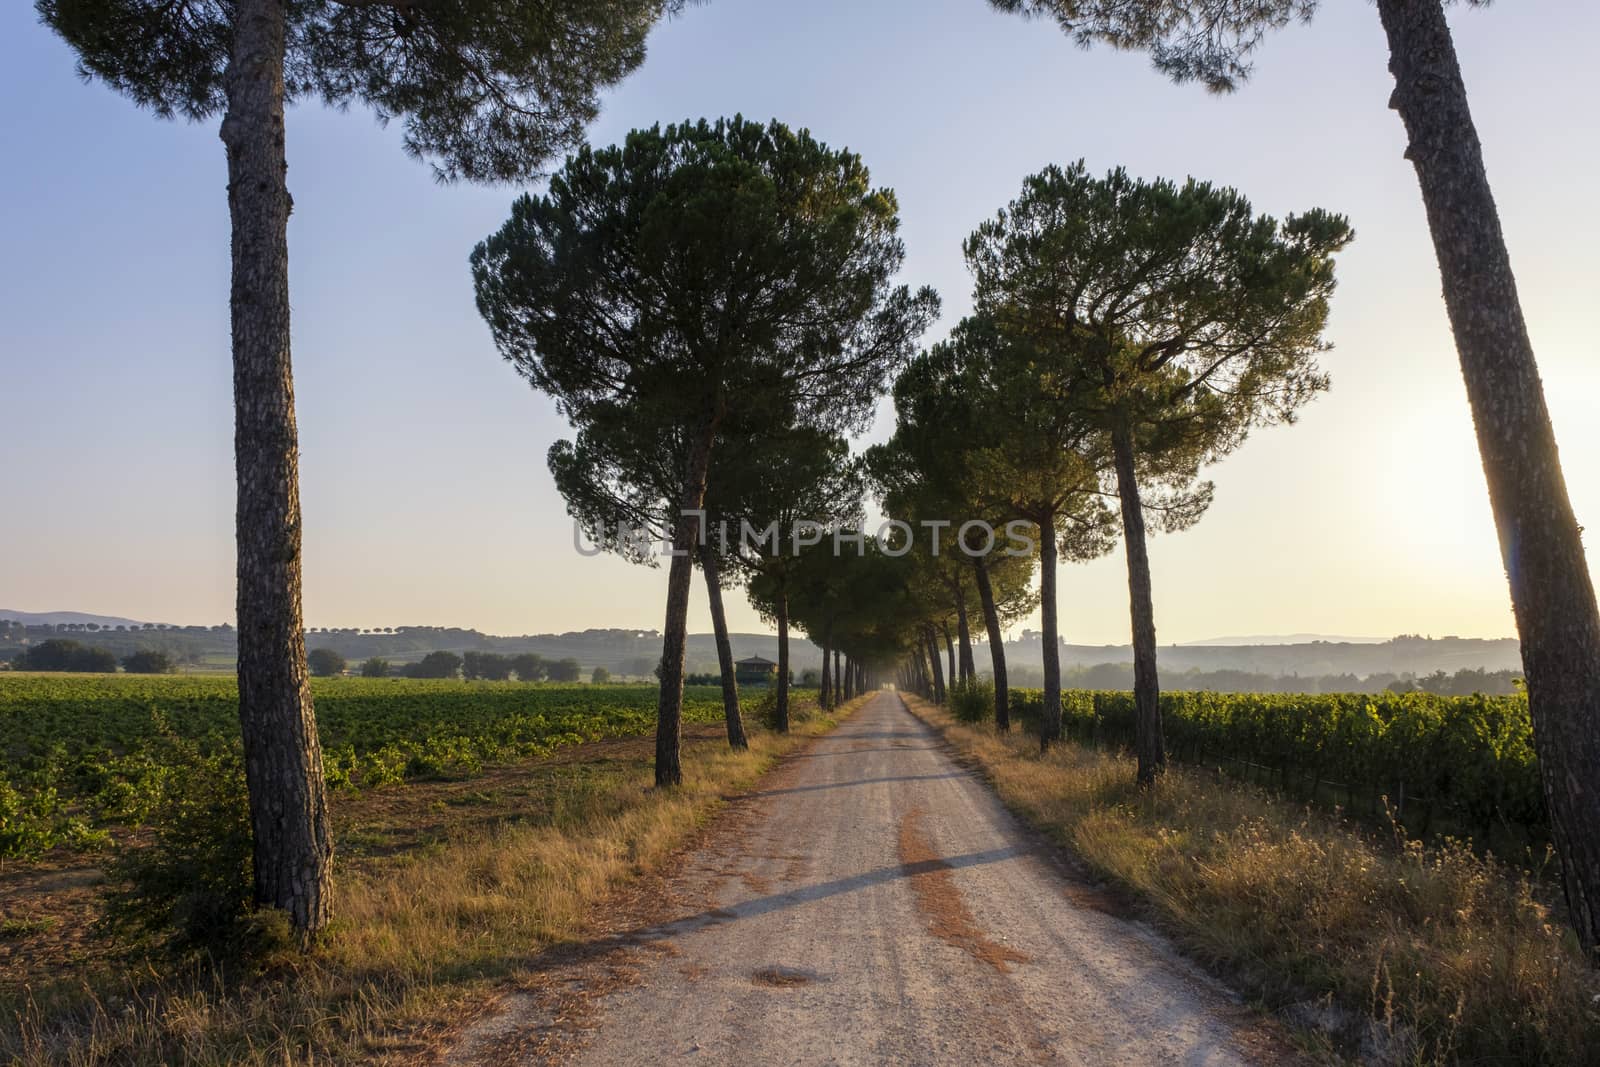 Travel in Tuscany. Beautiful and idyllic landscape of a lane of cypresses in the Tuscan countryside in Italy by Tjeerdkruse